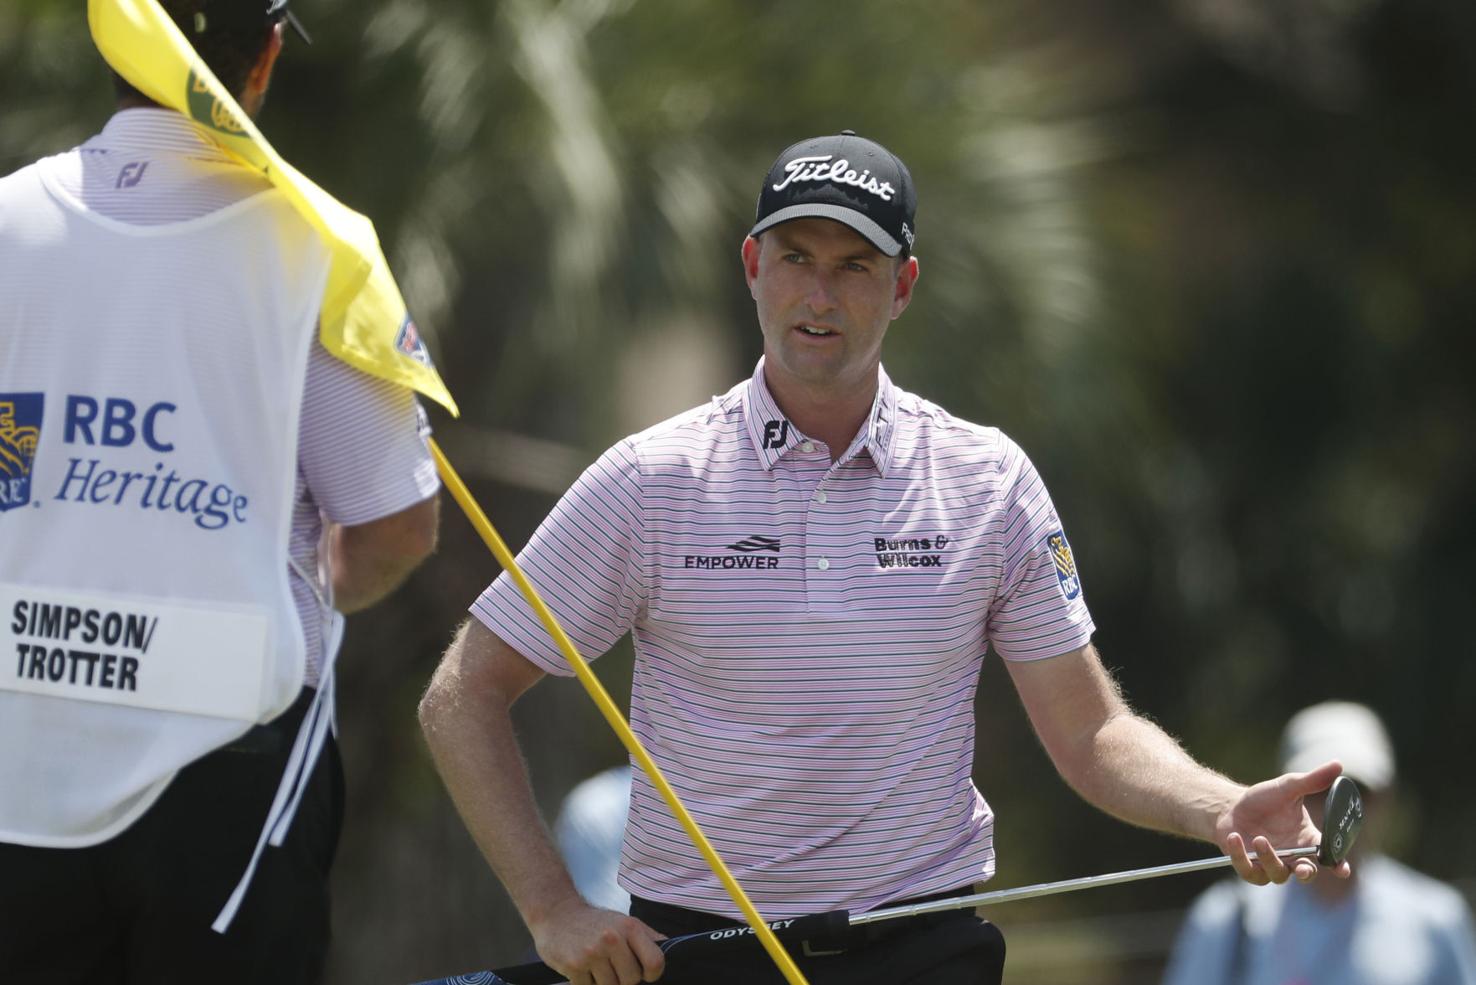 ‘Reimagined’ RBC Heritage golf tournament moves toward normalcy Golf